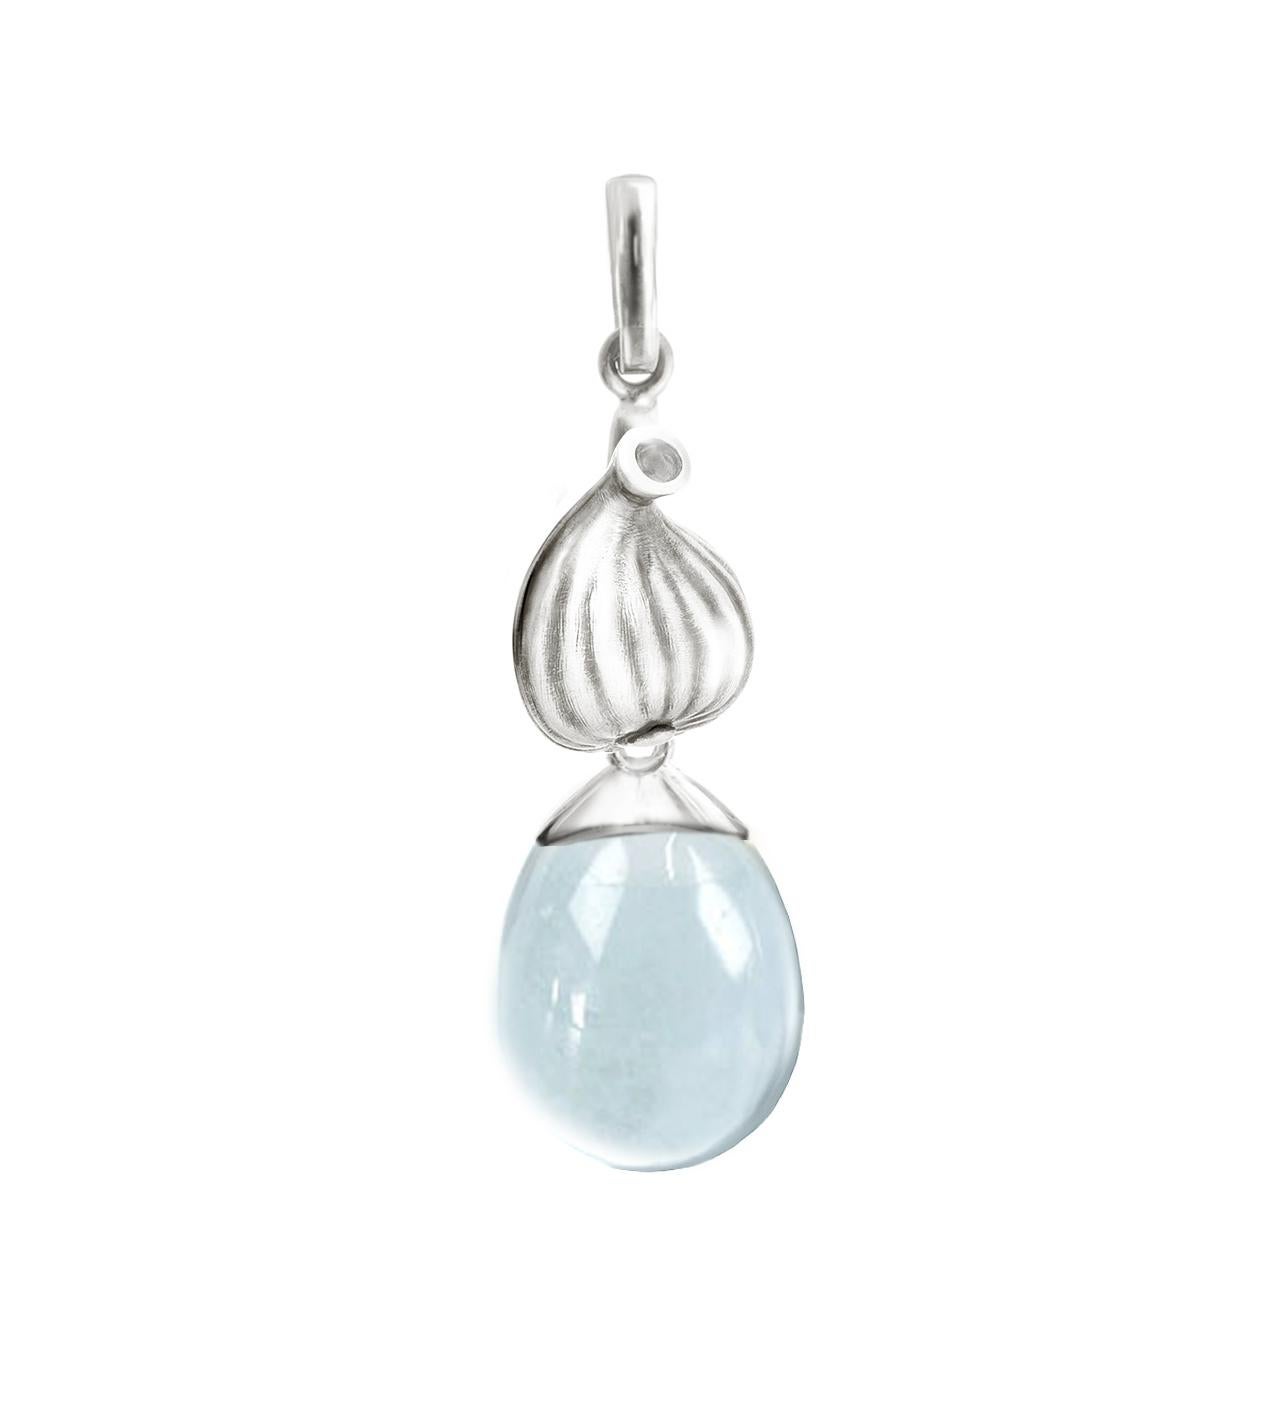 Sterling Silver Drop Pendant Necklace with Blue Topaz by the Artist